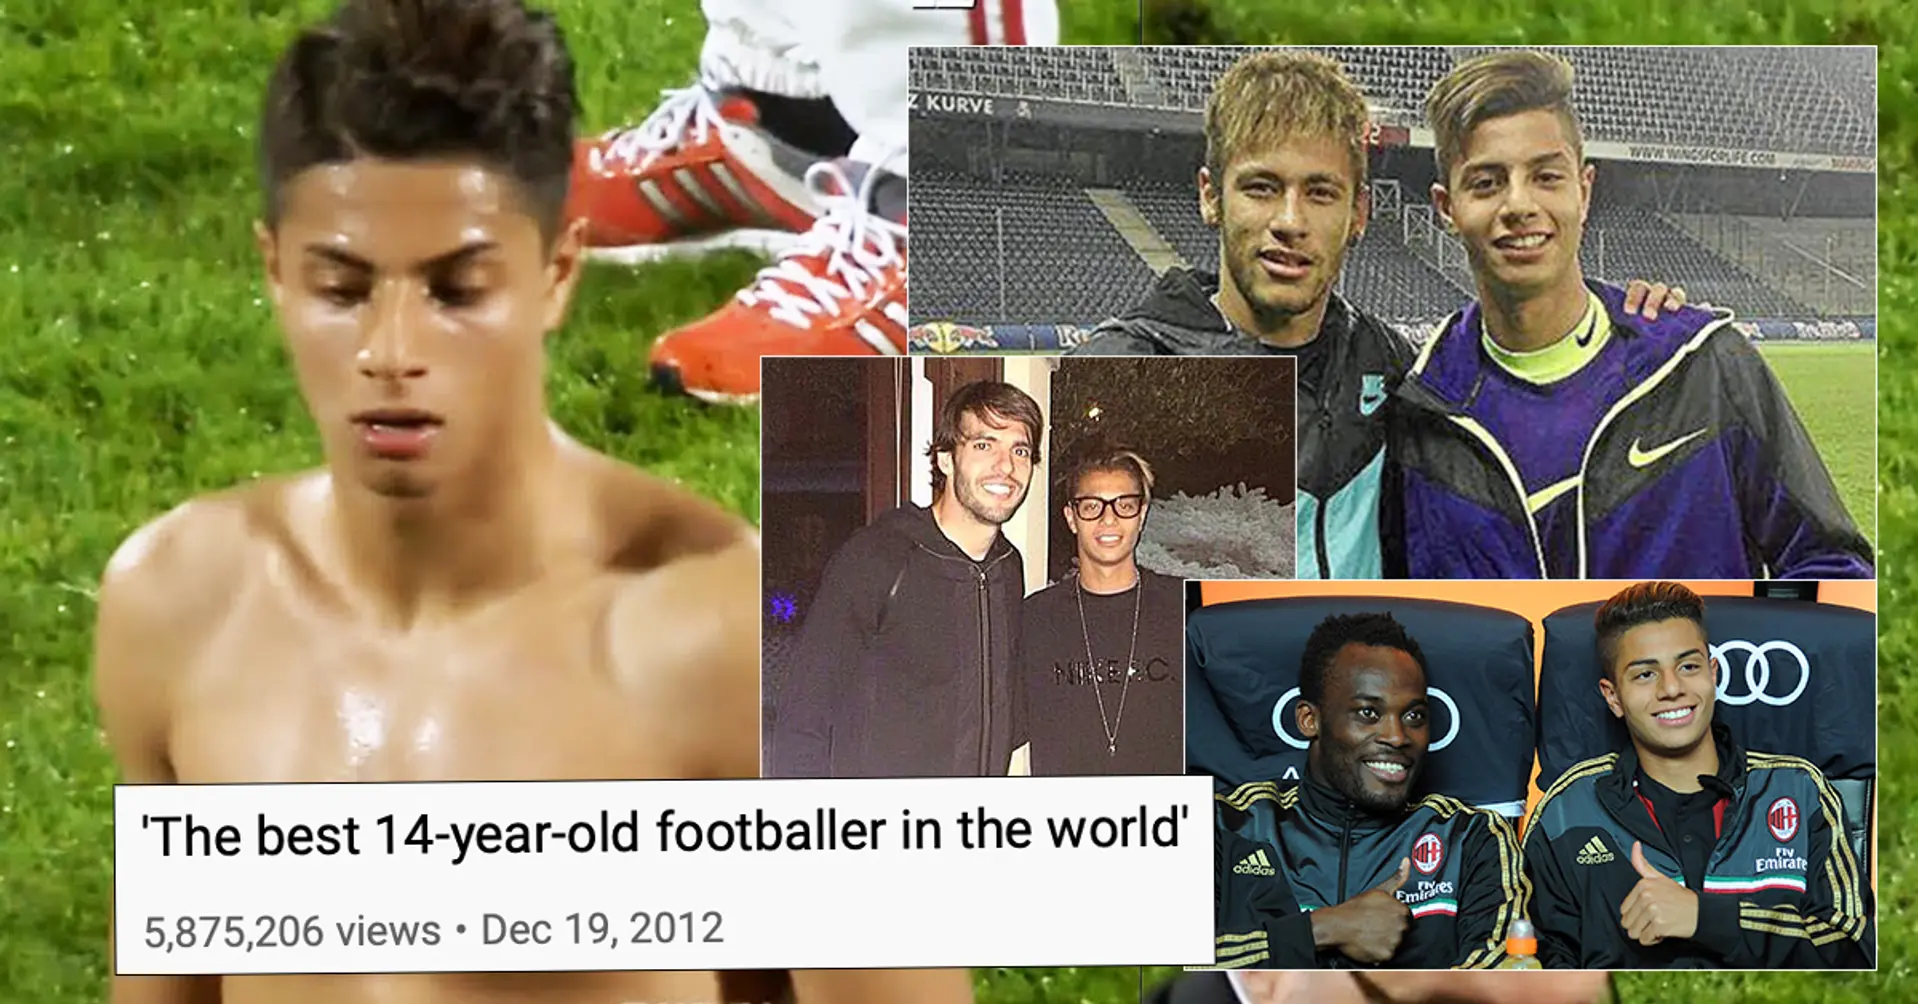 He was named 'the best 14-year-old player in the world' – where is he now?